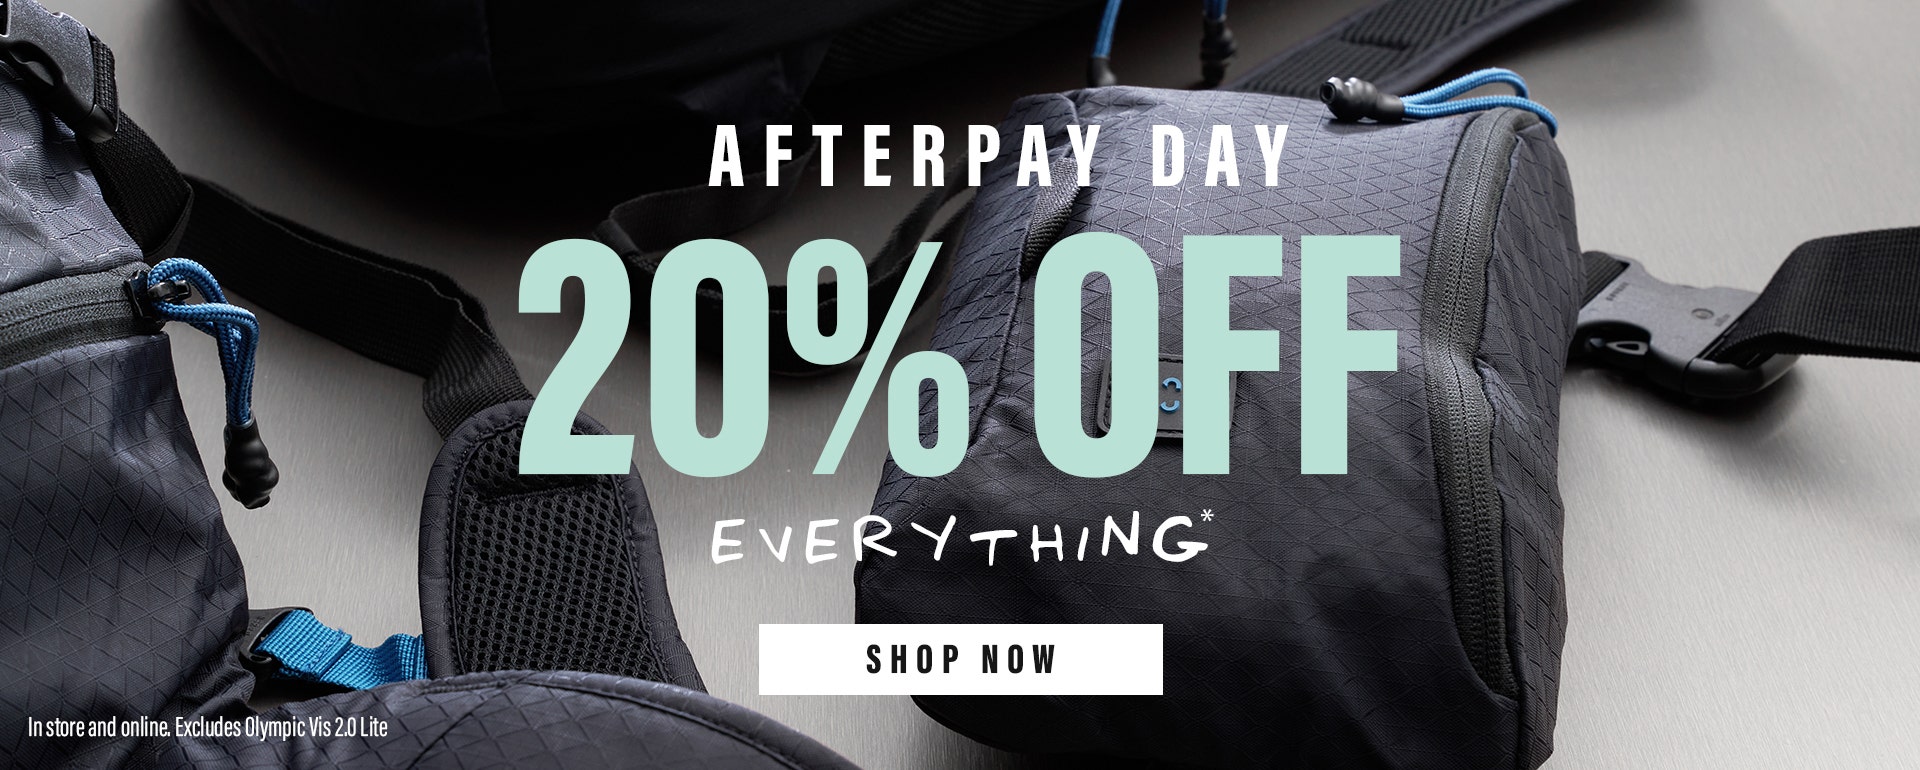 Afterpay Day sale - 20% OFF on everything